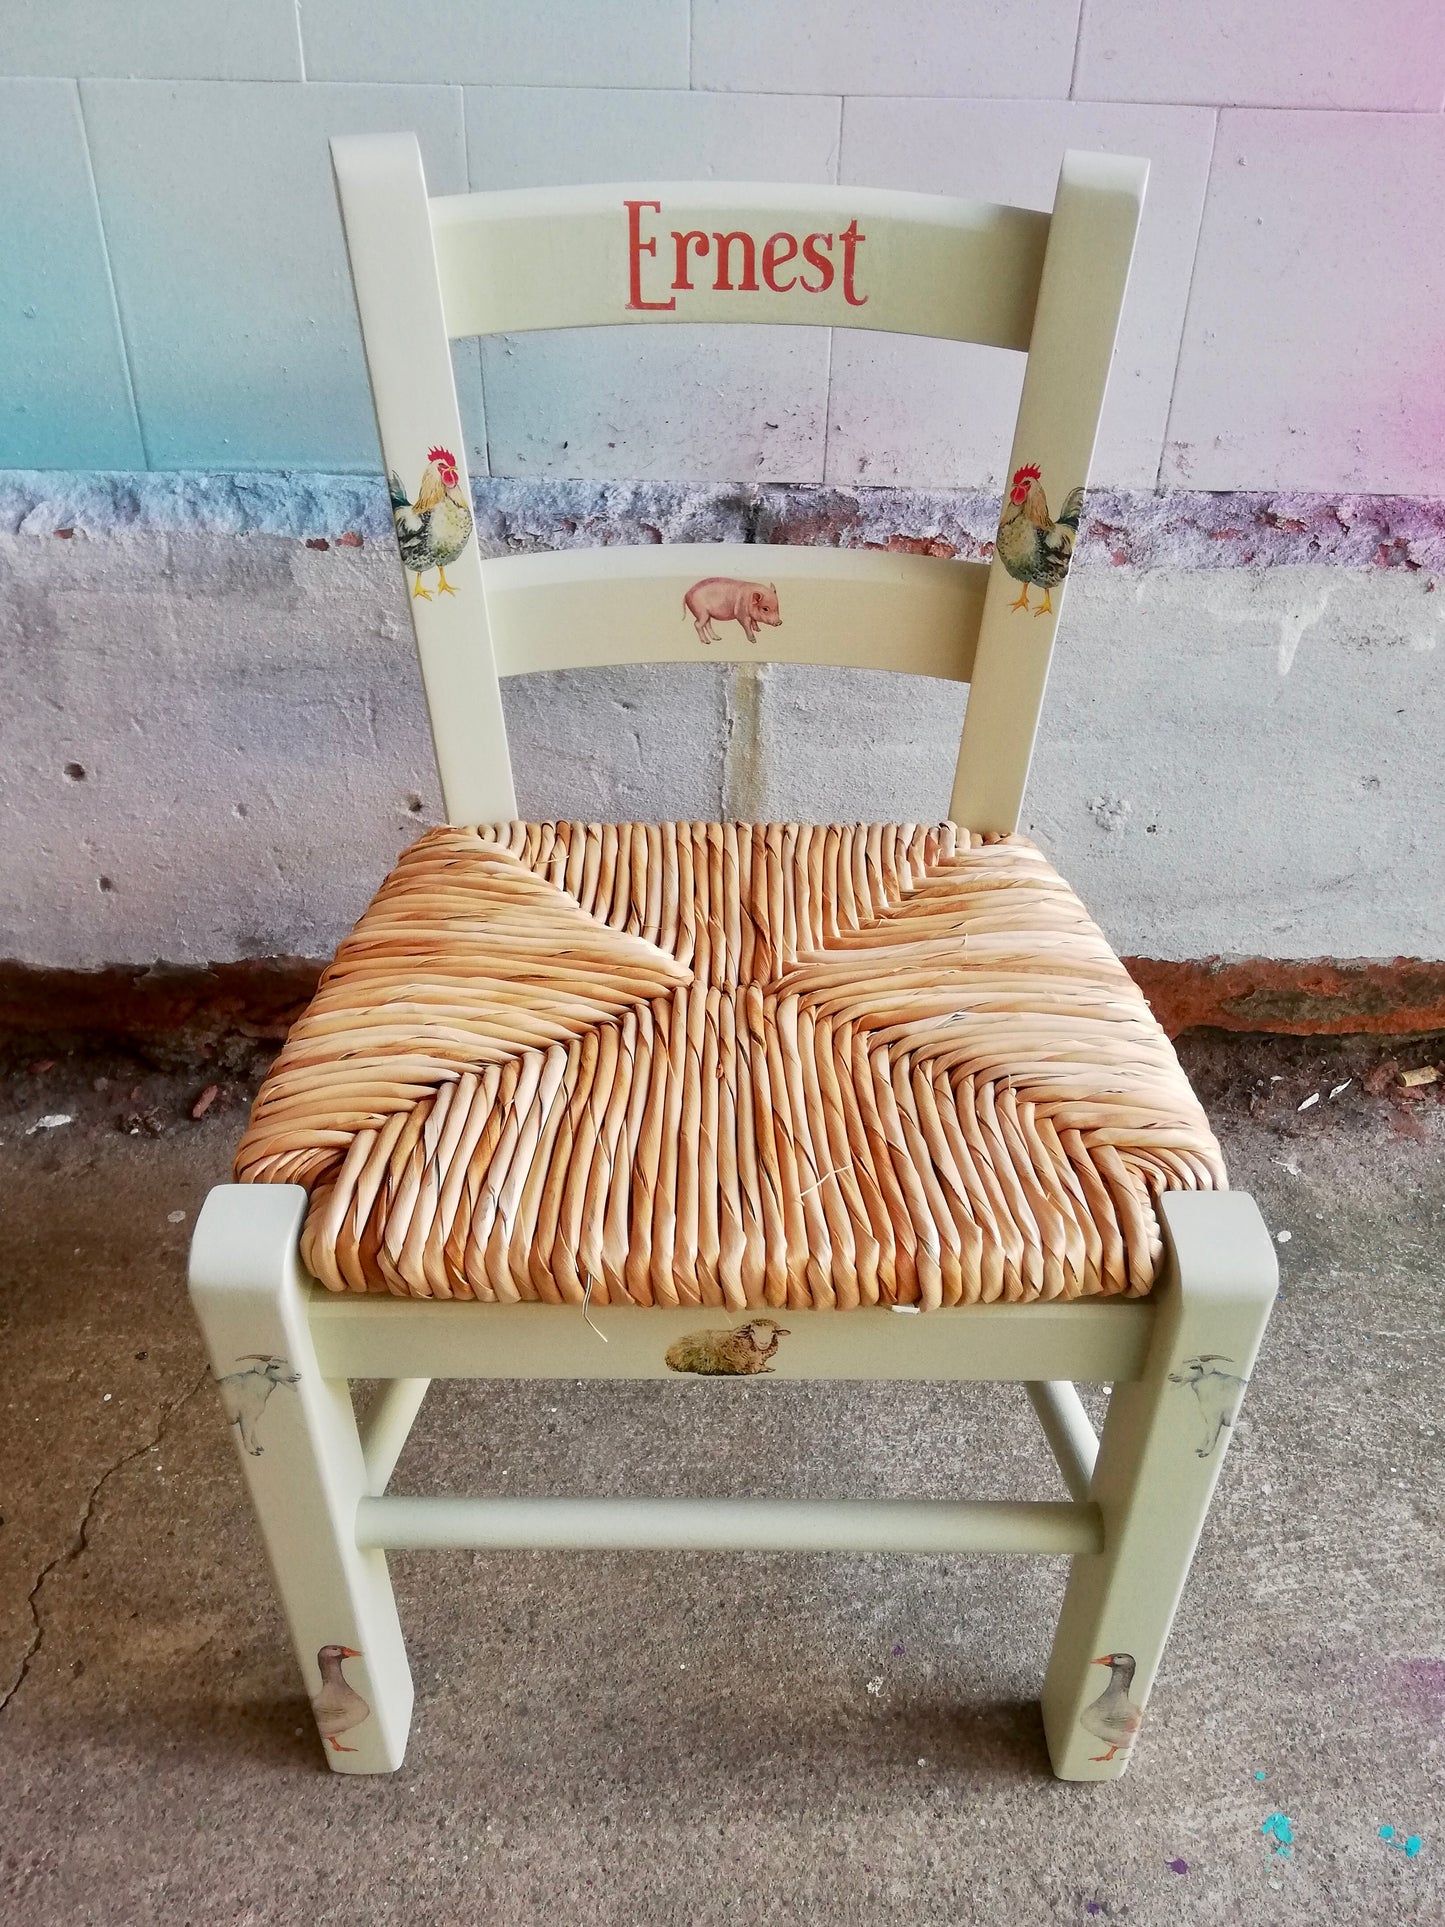 Rush seat personalised children's chair - Farm Friends theme - made to order